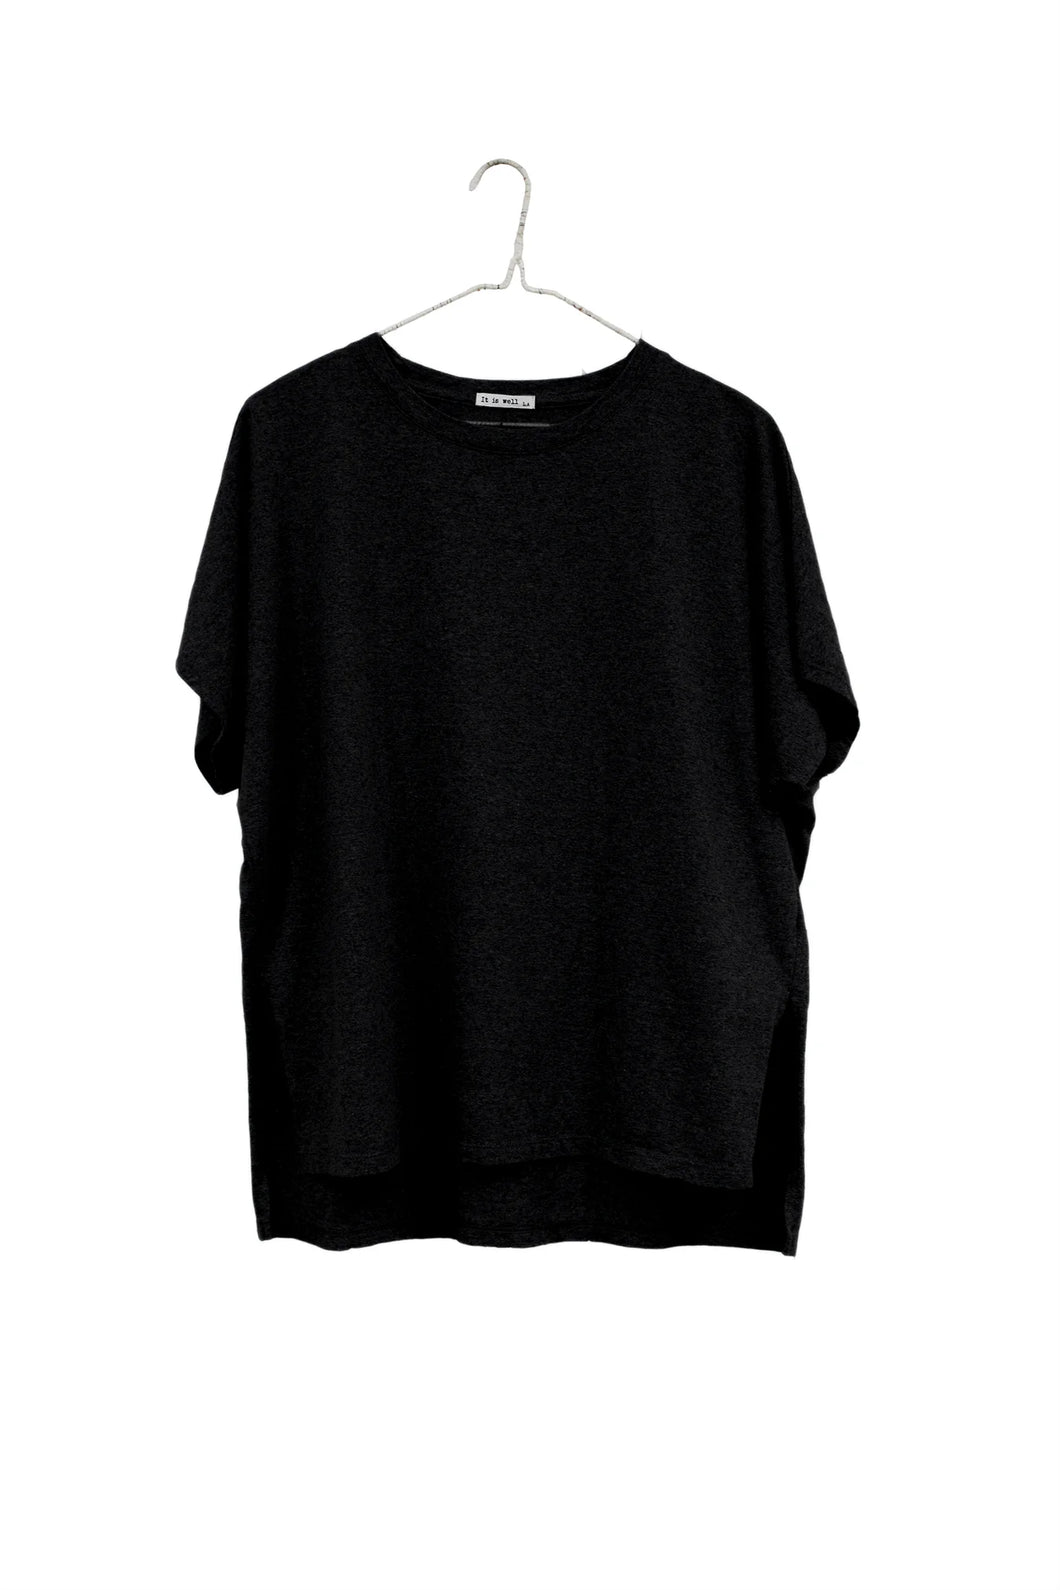 It Is Well | High Low Everyday Boxy Tee in Black